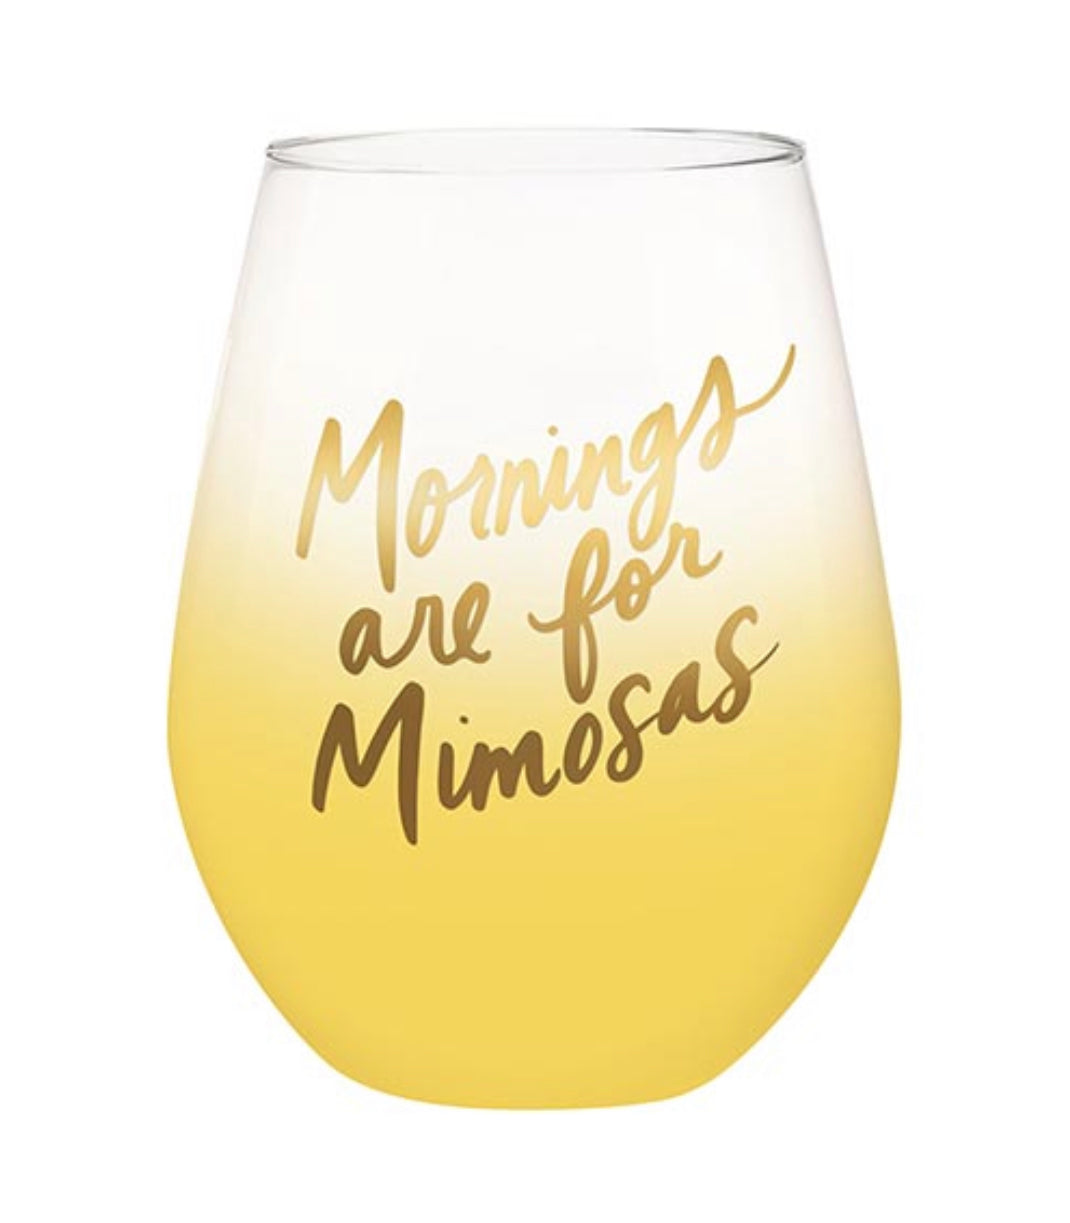 Mornings are for Mimosas Jumbo Wine Glass